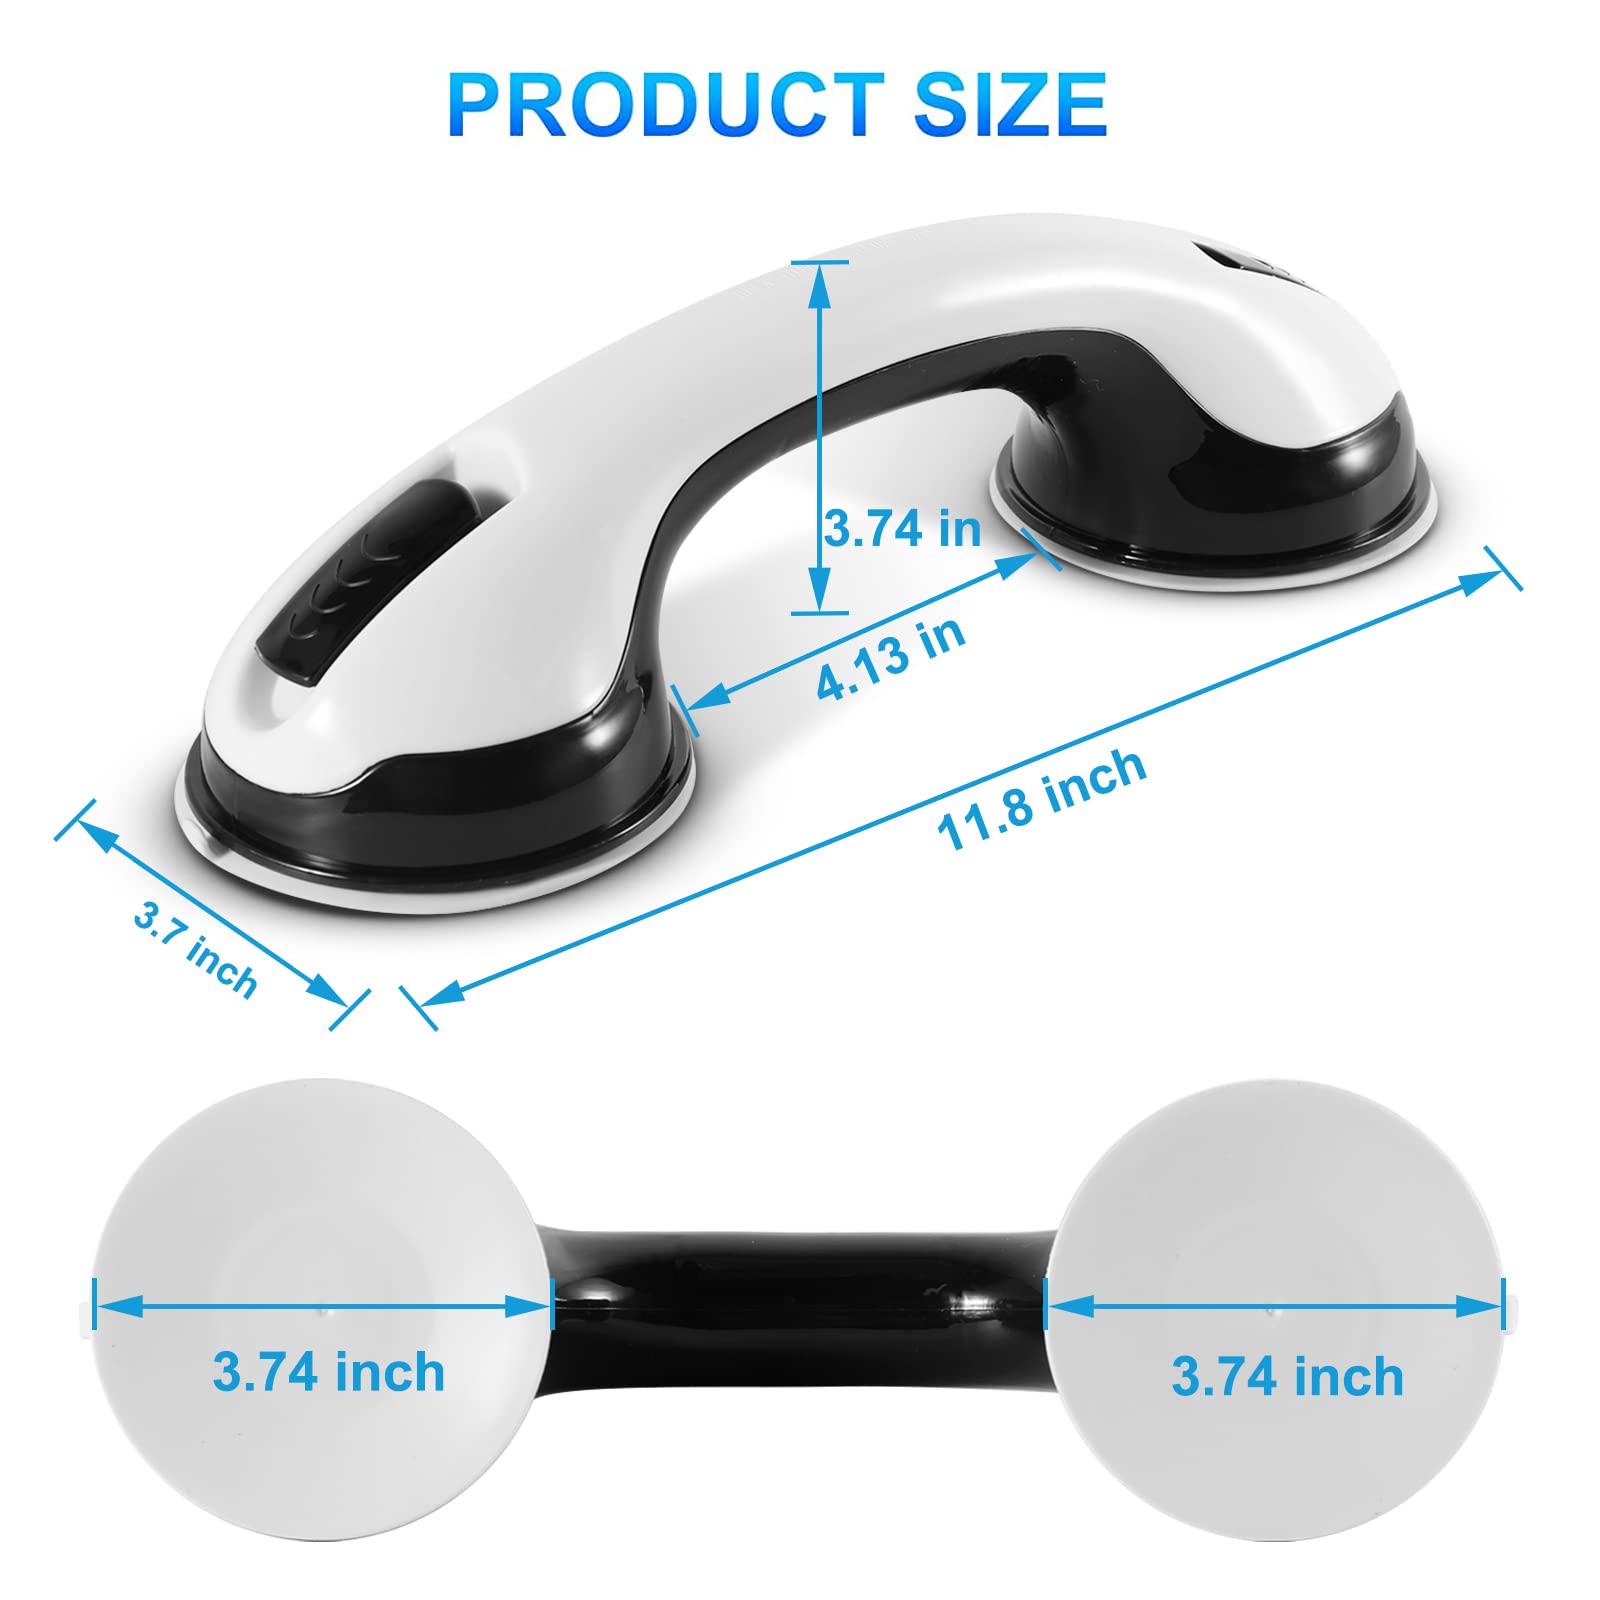 2PCS Shower Handles for Elderly Suction, Handicap Grab Bars for Bathubs and Showers, Bathroom Shower Grab Bar for Seniors with Strong Suction Cup for Wall, 12in Safety Support Handle